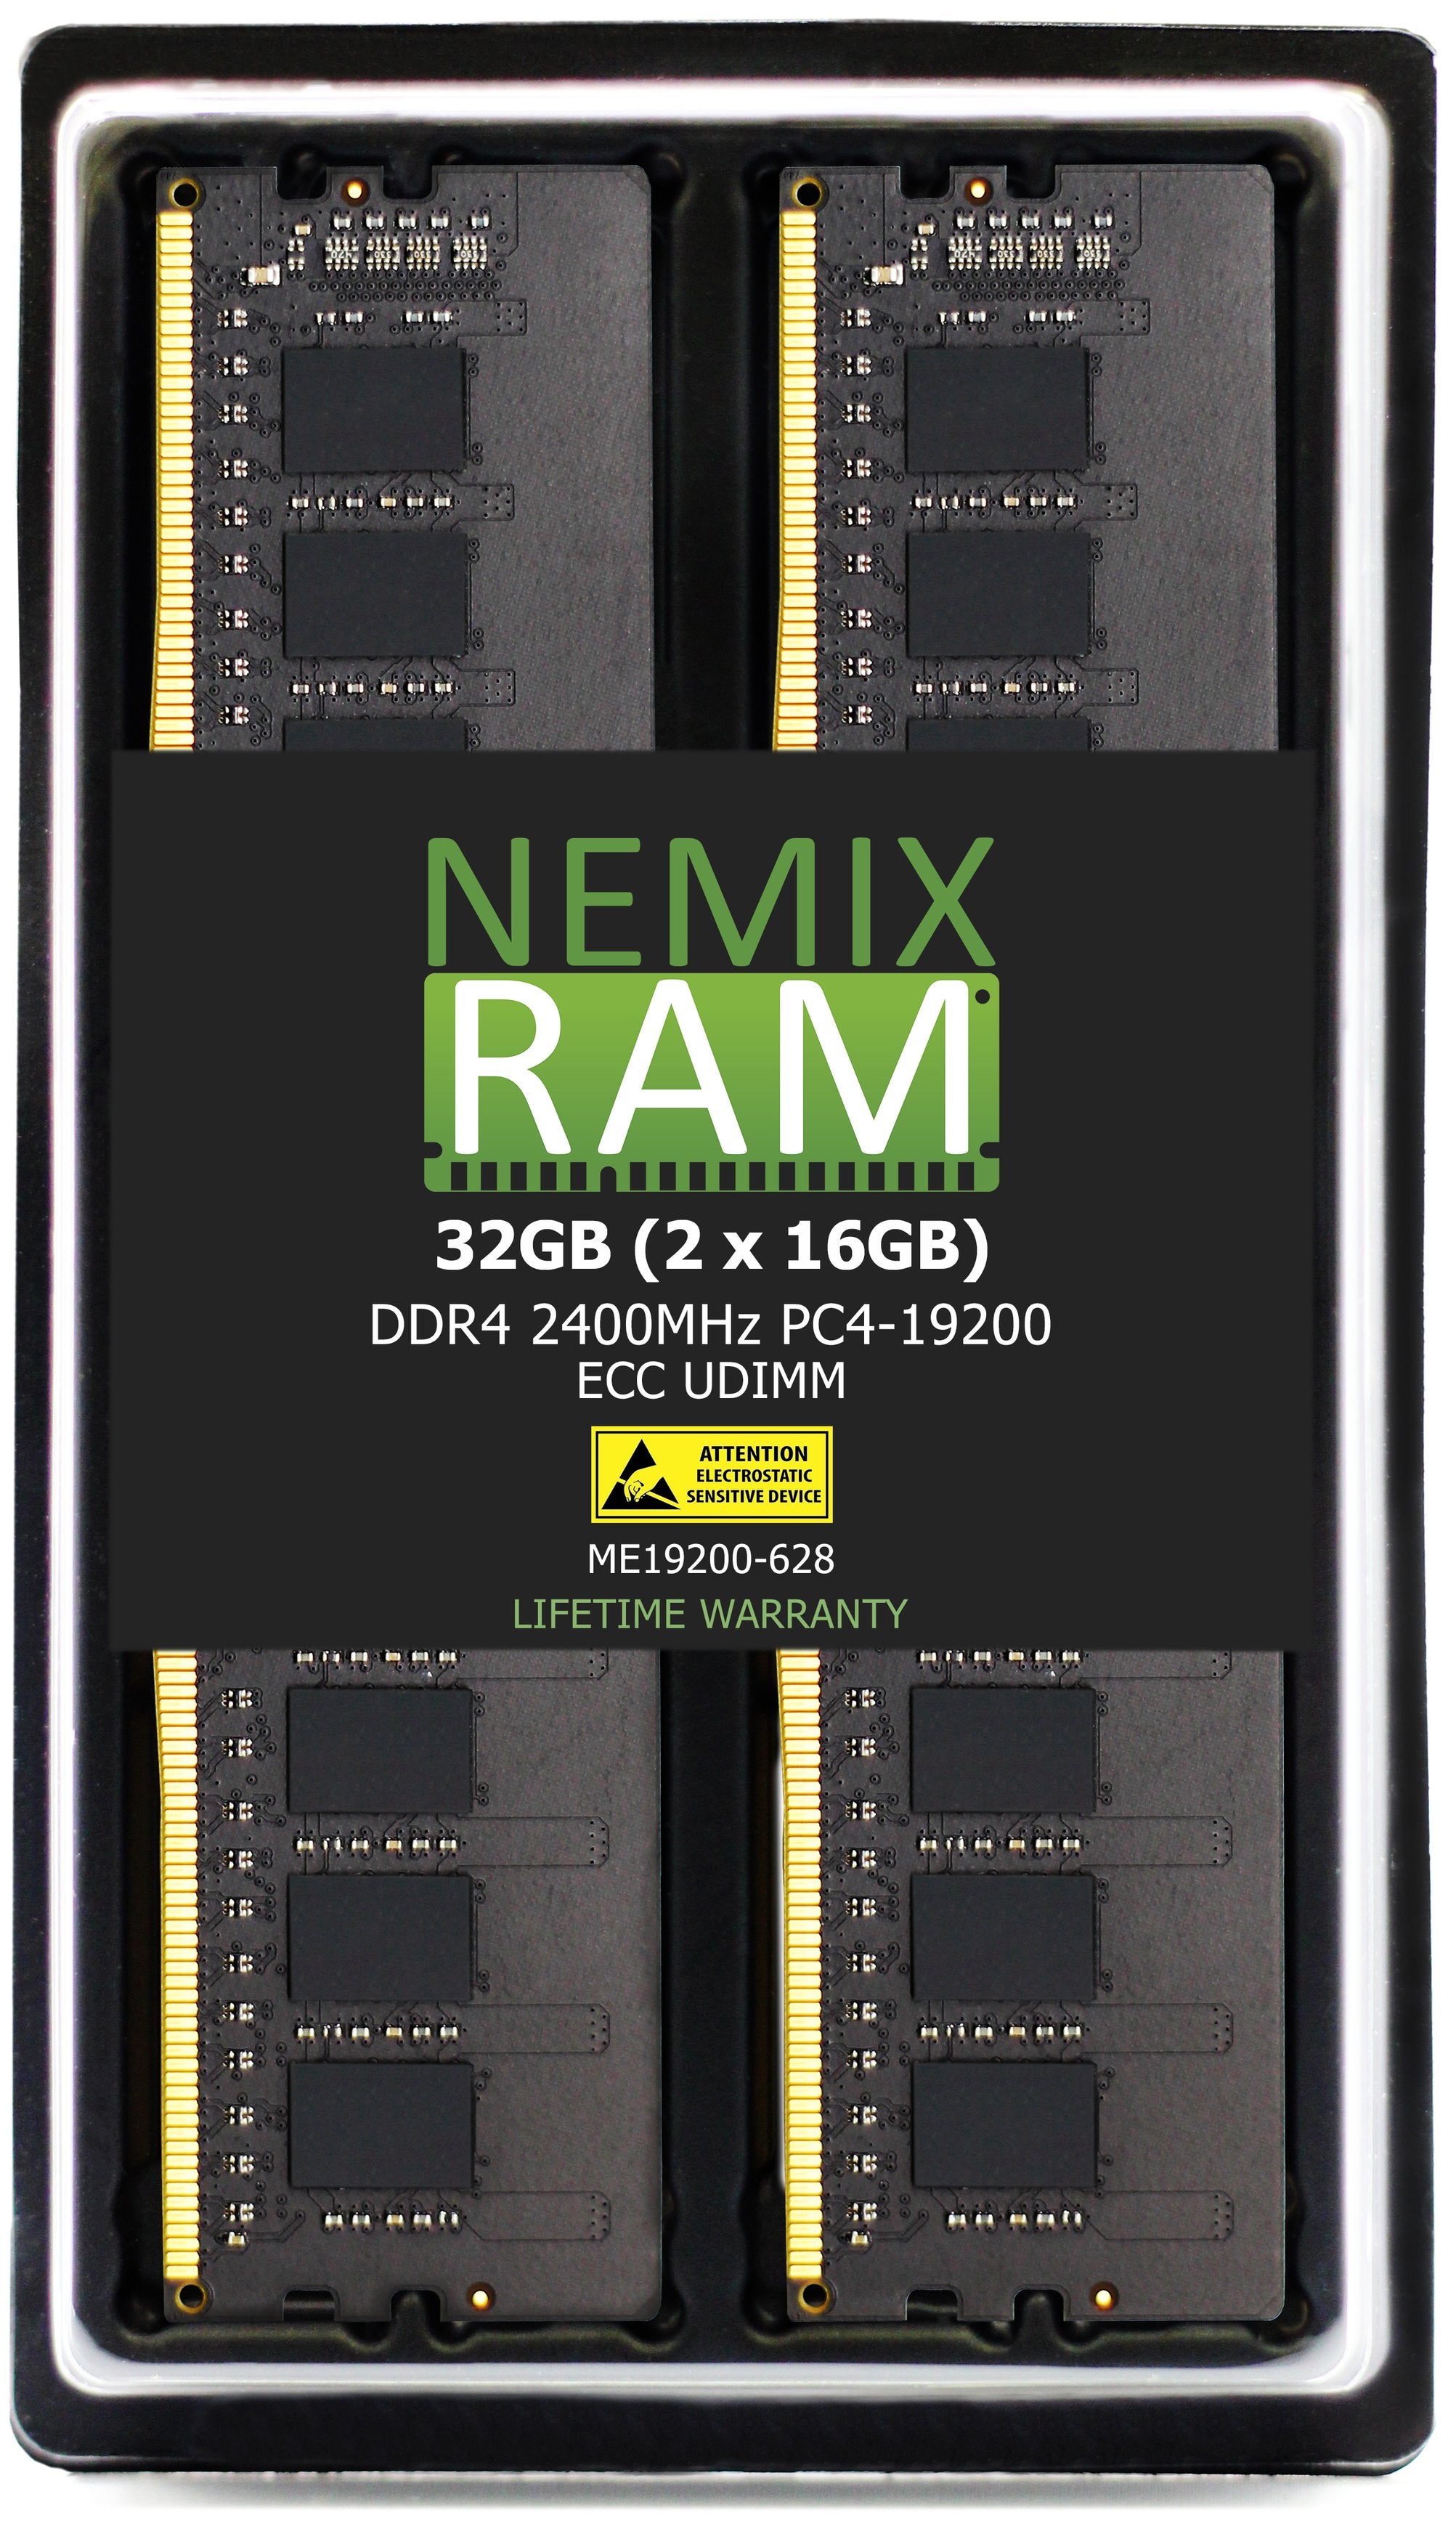 DDR4 2400MHZ PC4-19200 ECC UDIMM Compatible with Synology D4EC-2400-16G